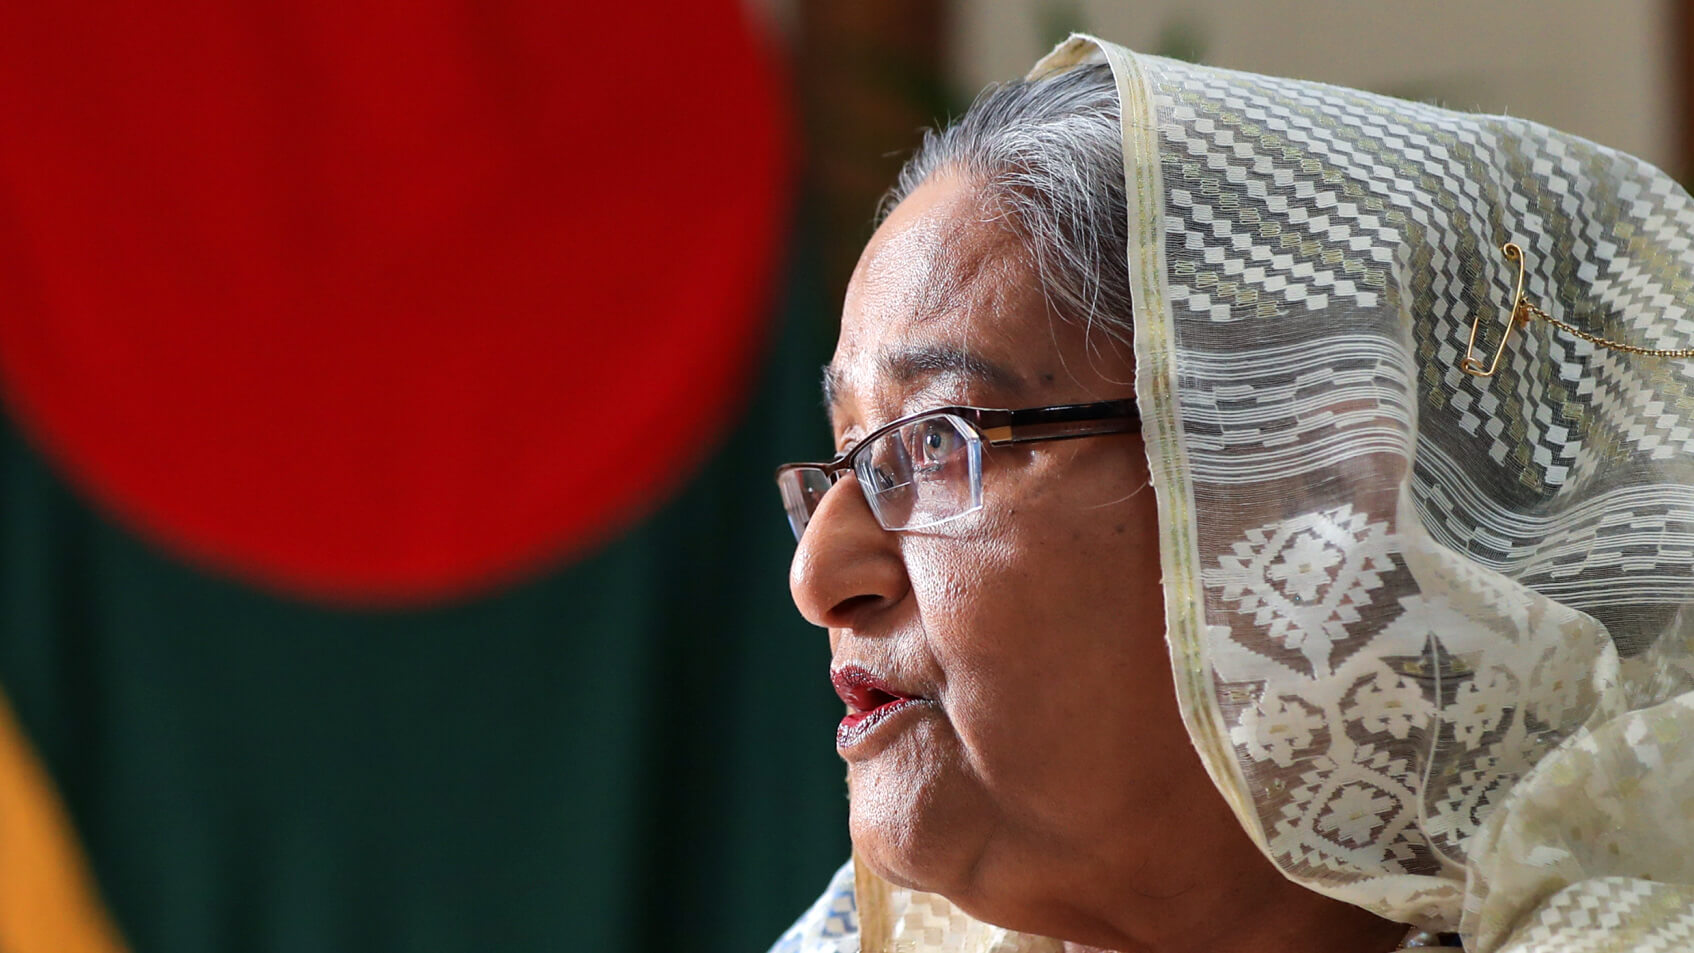 Bangladeshi PM Hasina says “Free, Fair Elections” Only Happen When Awami League in Power